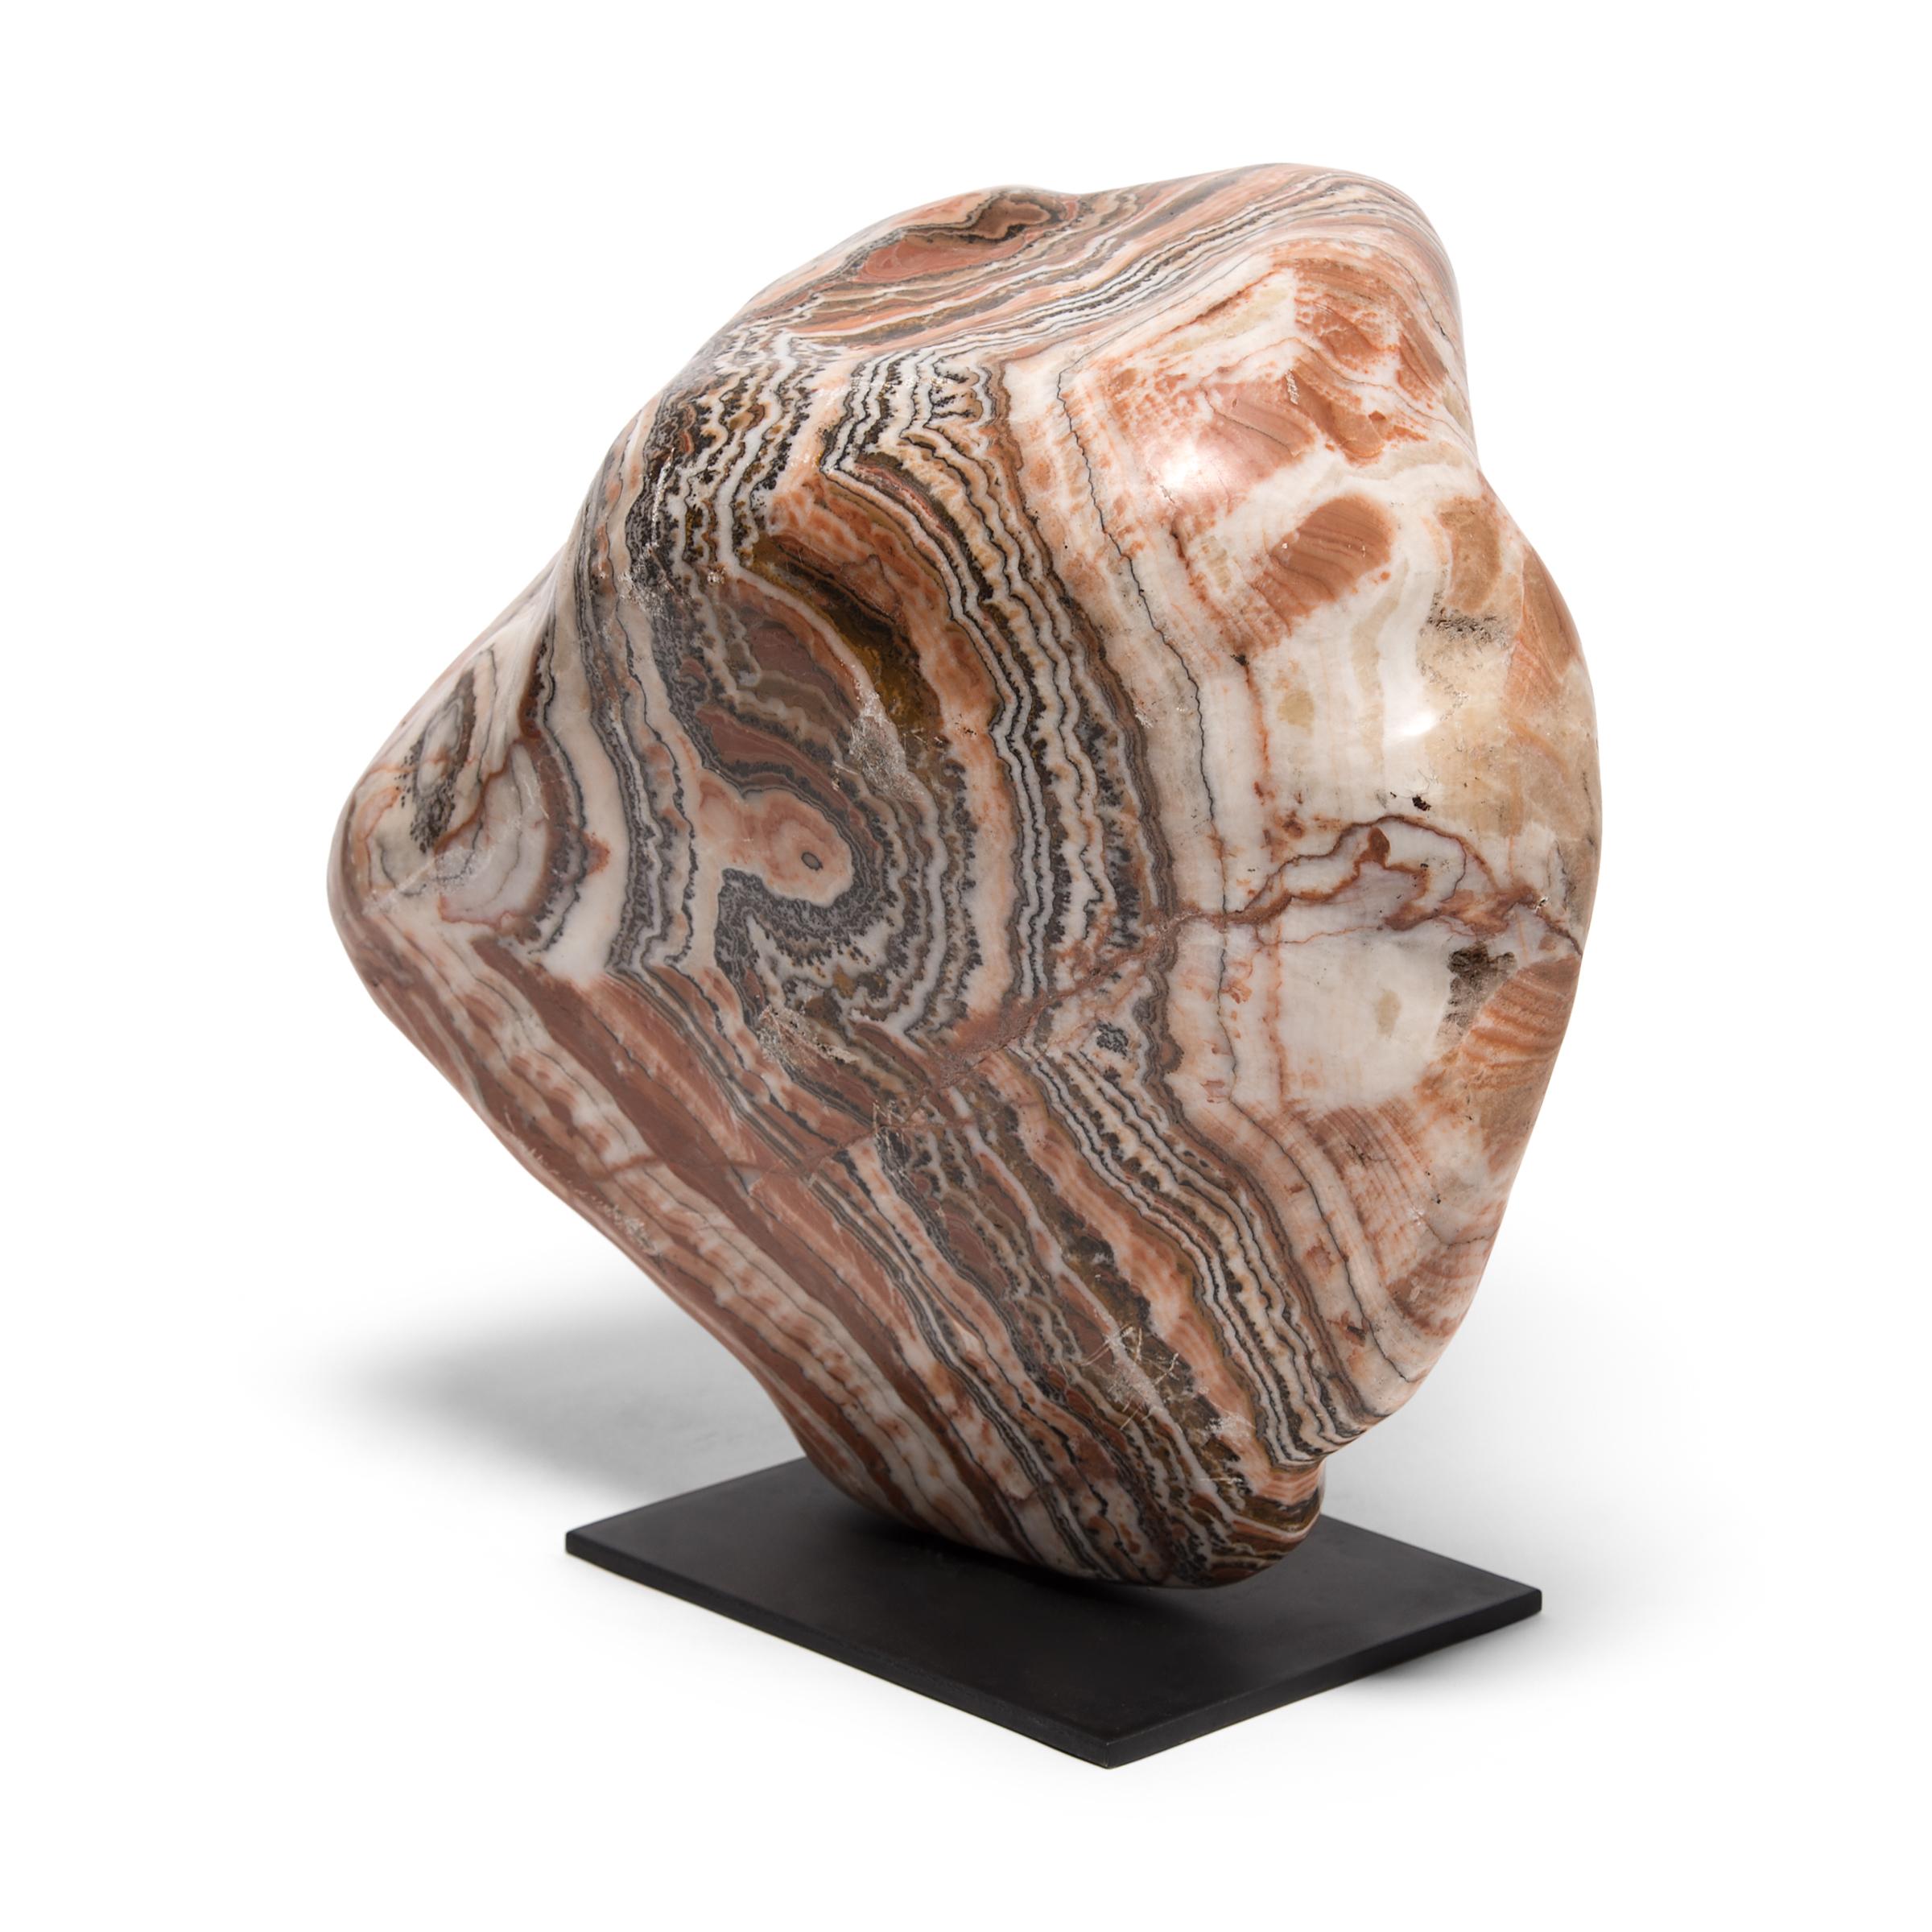 A well-chosen stone is a focal point of both a traditional Chinese garden and a scholar's studio - evoking the complexities of nature and inspiring creative thought. Sourced from China's Henan province, this Nan yang meditation stone swirls with a